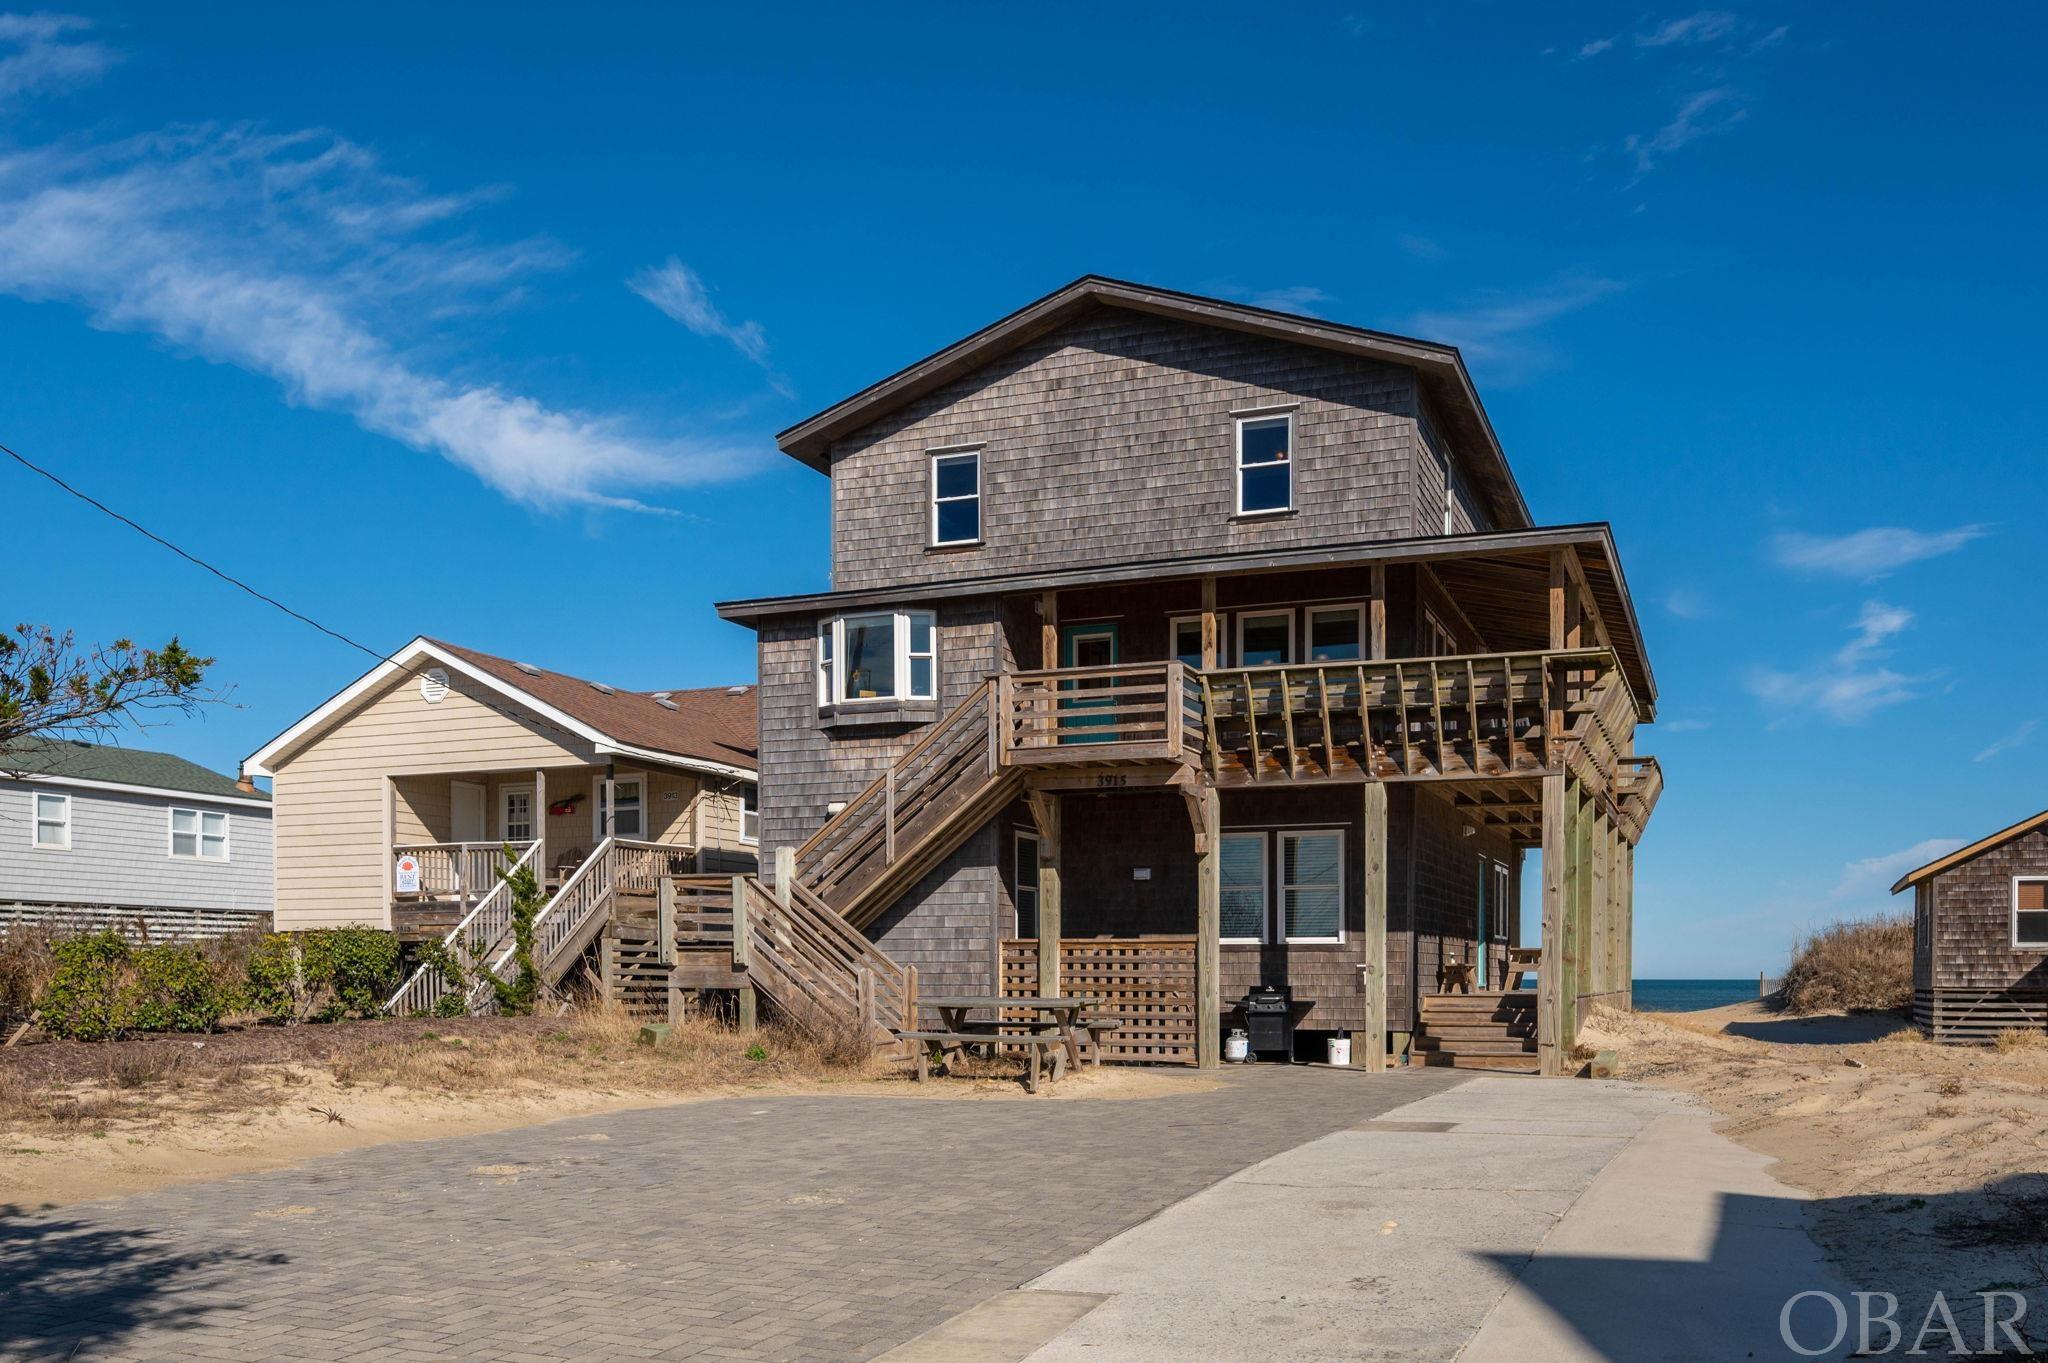 OVER $160,000 in GROSS RENTS IN 2023! This indeed is a very rare opportunity for you to own in the unpainted aristocracy of Cottage Row in Nags Head. Listed on the National Register of Historic Places in the Old Nags Head District, this 7-bedroom, 6 full-bath home has been thoughtfully and intentionally upgraded without sacrificing any of its original charms. The traditional Nags Head Cottage design with wrap-around porches and abundant windows affords dazzling ocean views to the east and breathtaking sunsets over Jockey's Ridge to the west. Enjoy traditional style living on the open-concept main level with incredible views of the Atlantic and a nostalgic fireplace that beckons cozy, family gatherings. On the top level, you'll find four spacious bedrooms, two with en-suite baths and access to open decks for private sun tanning or ocean gazing, and two with a shared bath and incredible views of Jockey's Ridge. In 2019, three additional bedrooms and a den completed on the lower level with wet bar were added to this home. Outdoors you'll discover easy access to the beach, more seating areas and an outdoor shower. This property offers so much with its modern amenities while retaining its original Nags Head design. It's definitely a must-see!